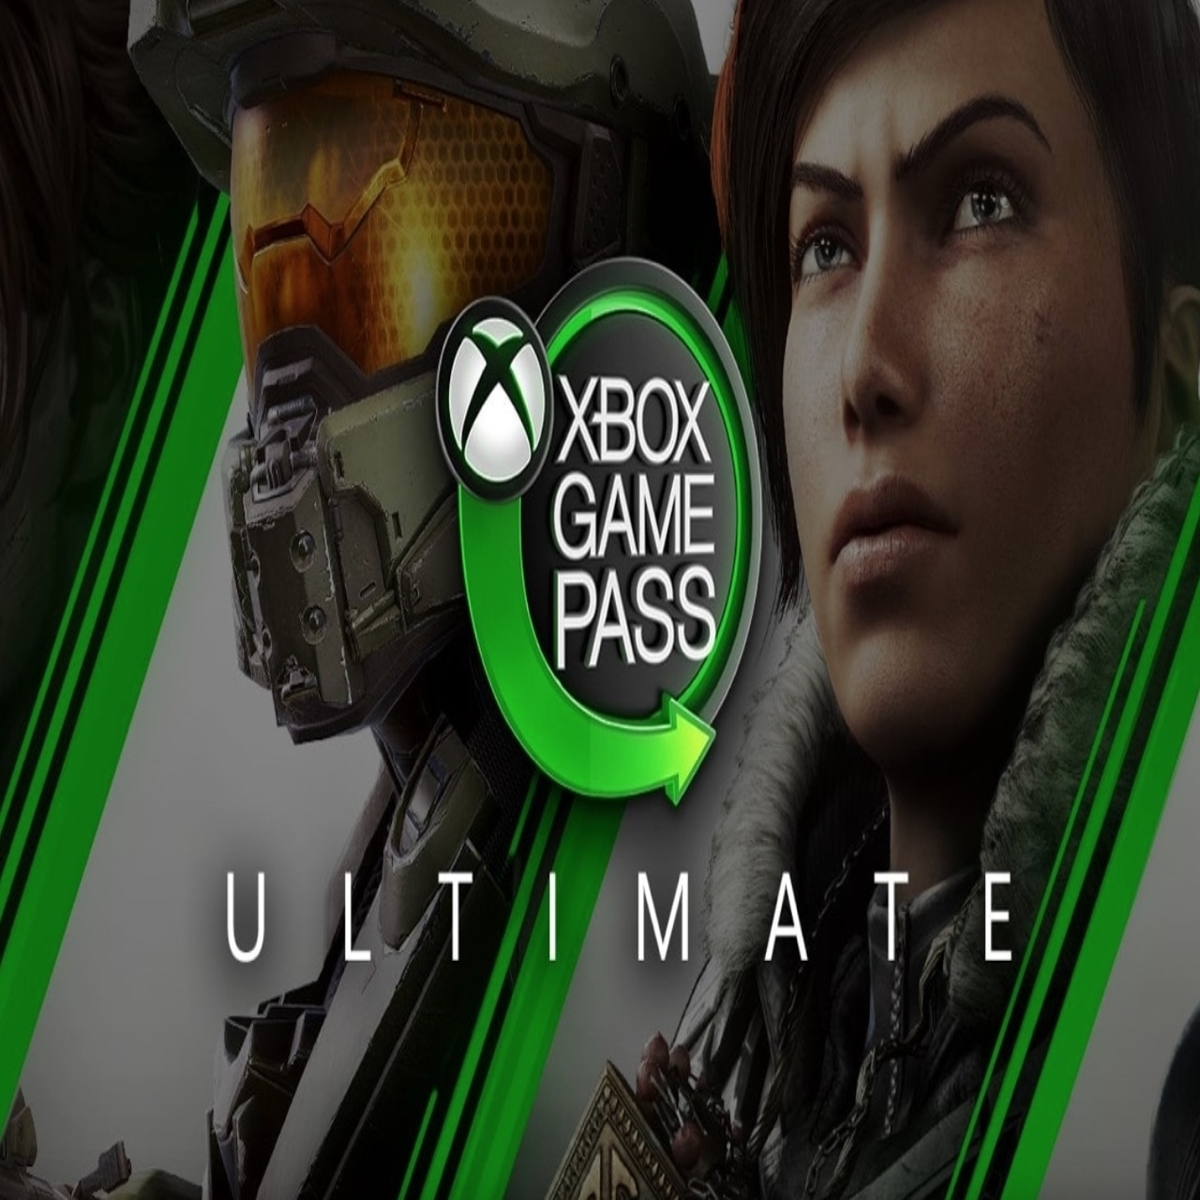 Play the Battlefield 2042 PC beta right now with Xbox Game Pass Ultimate.